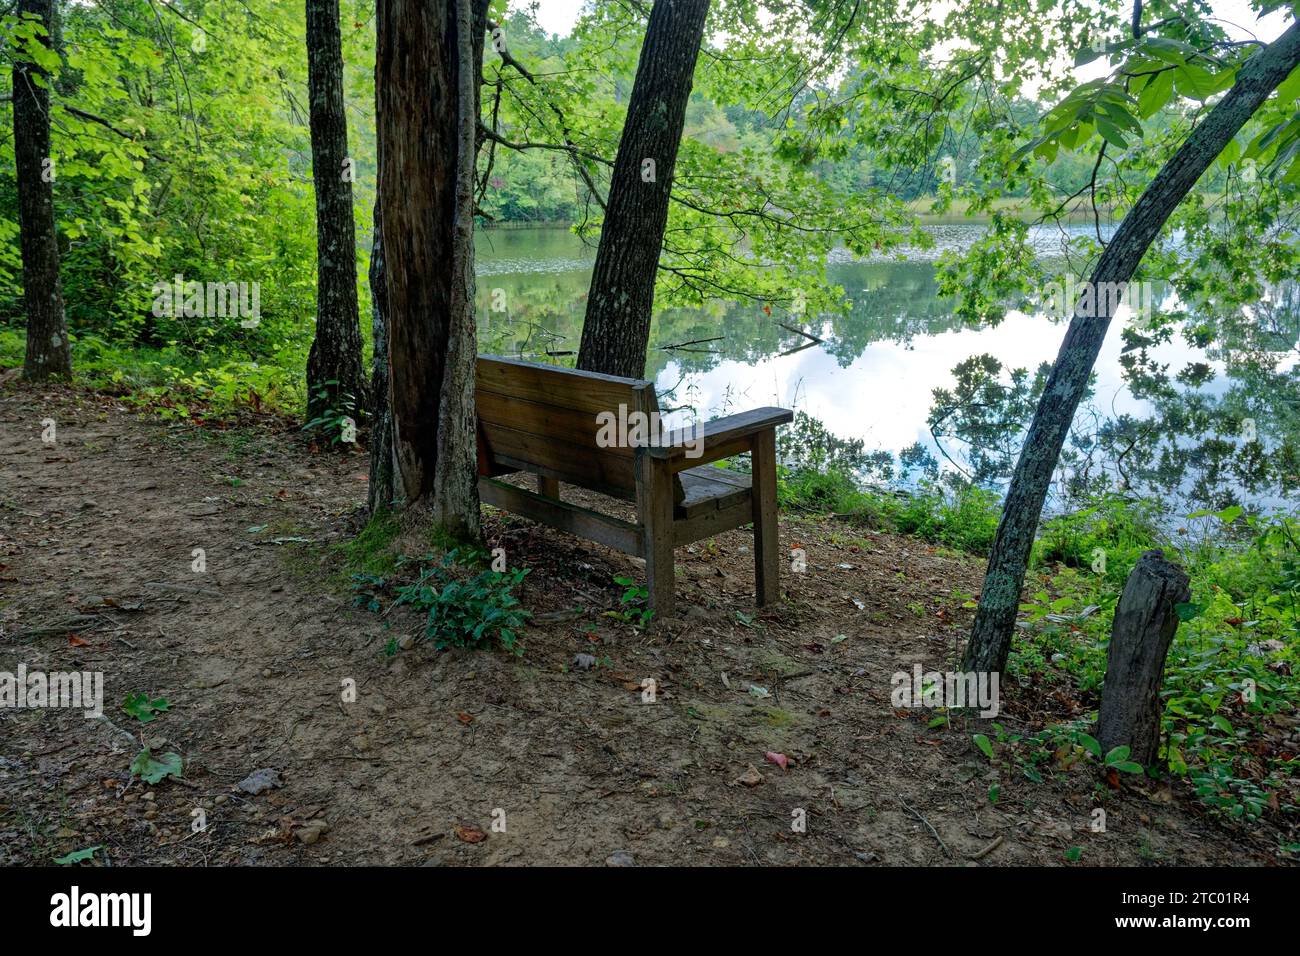 Along the trail is a sitting bench looking out at the lake in the forest in a shaded area in late summertime Stock Photo